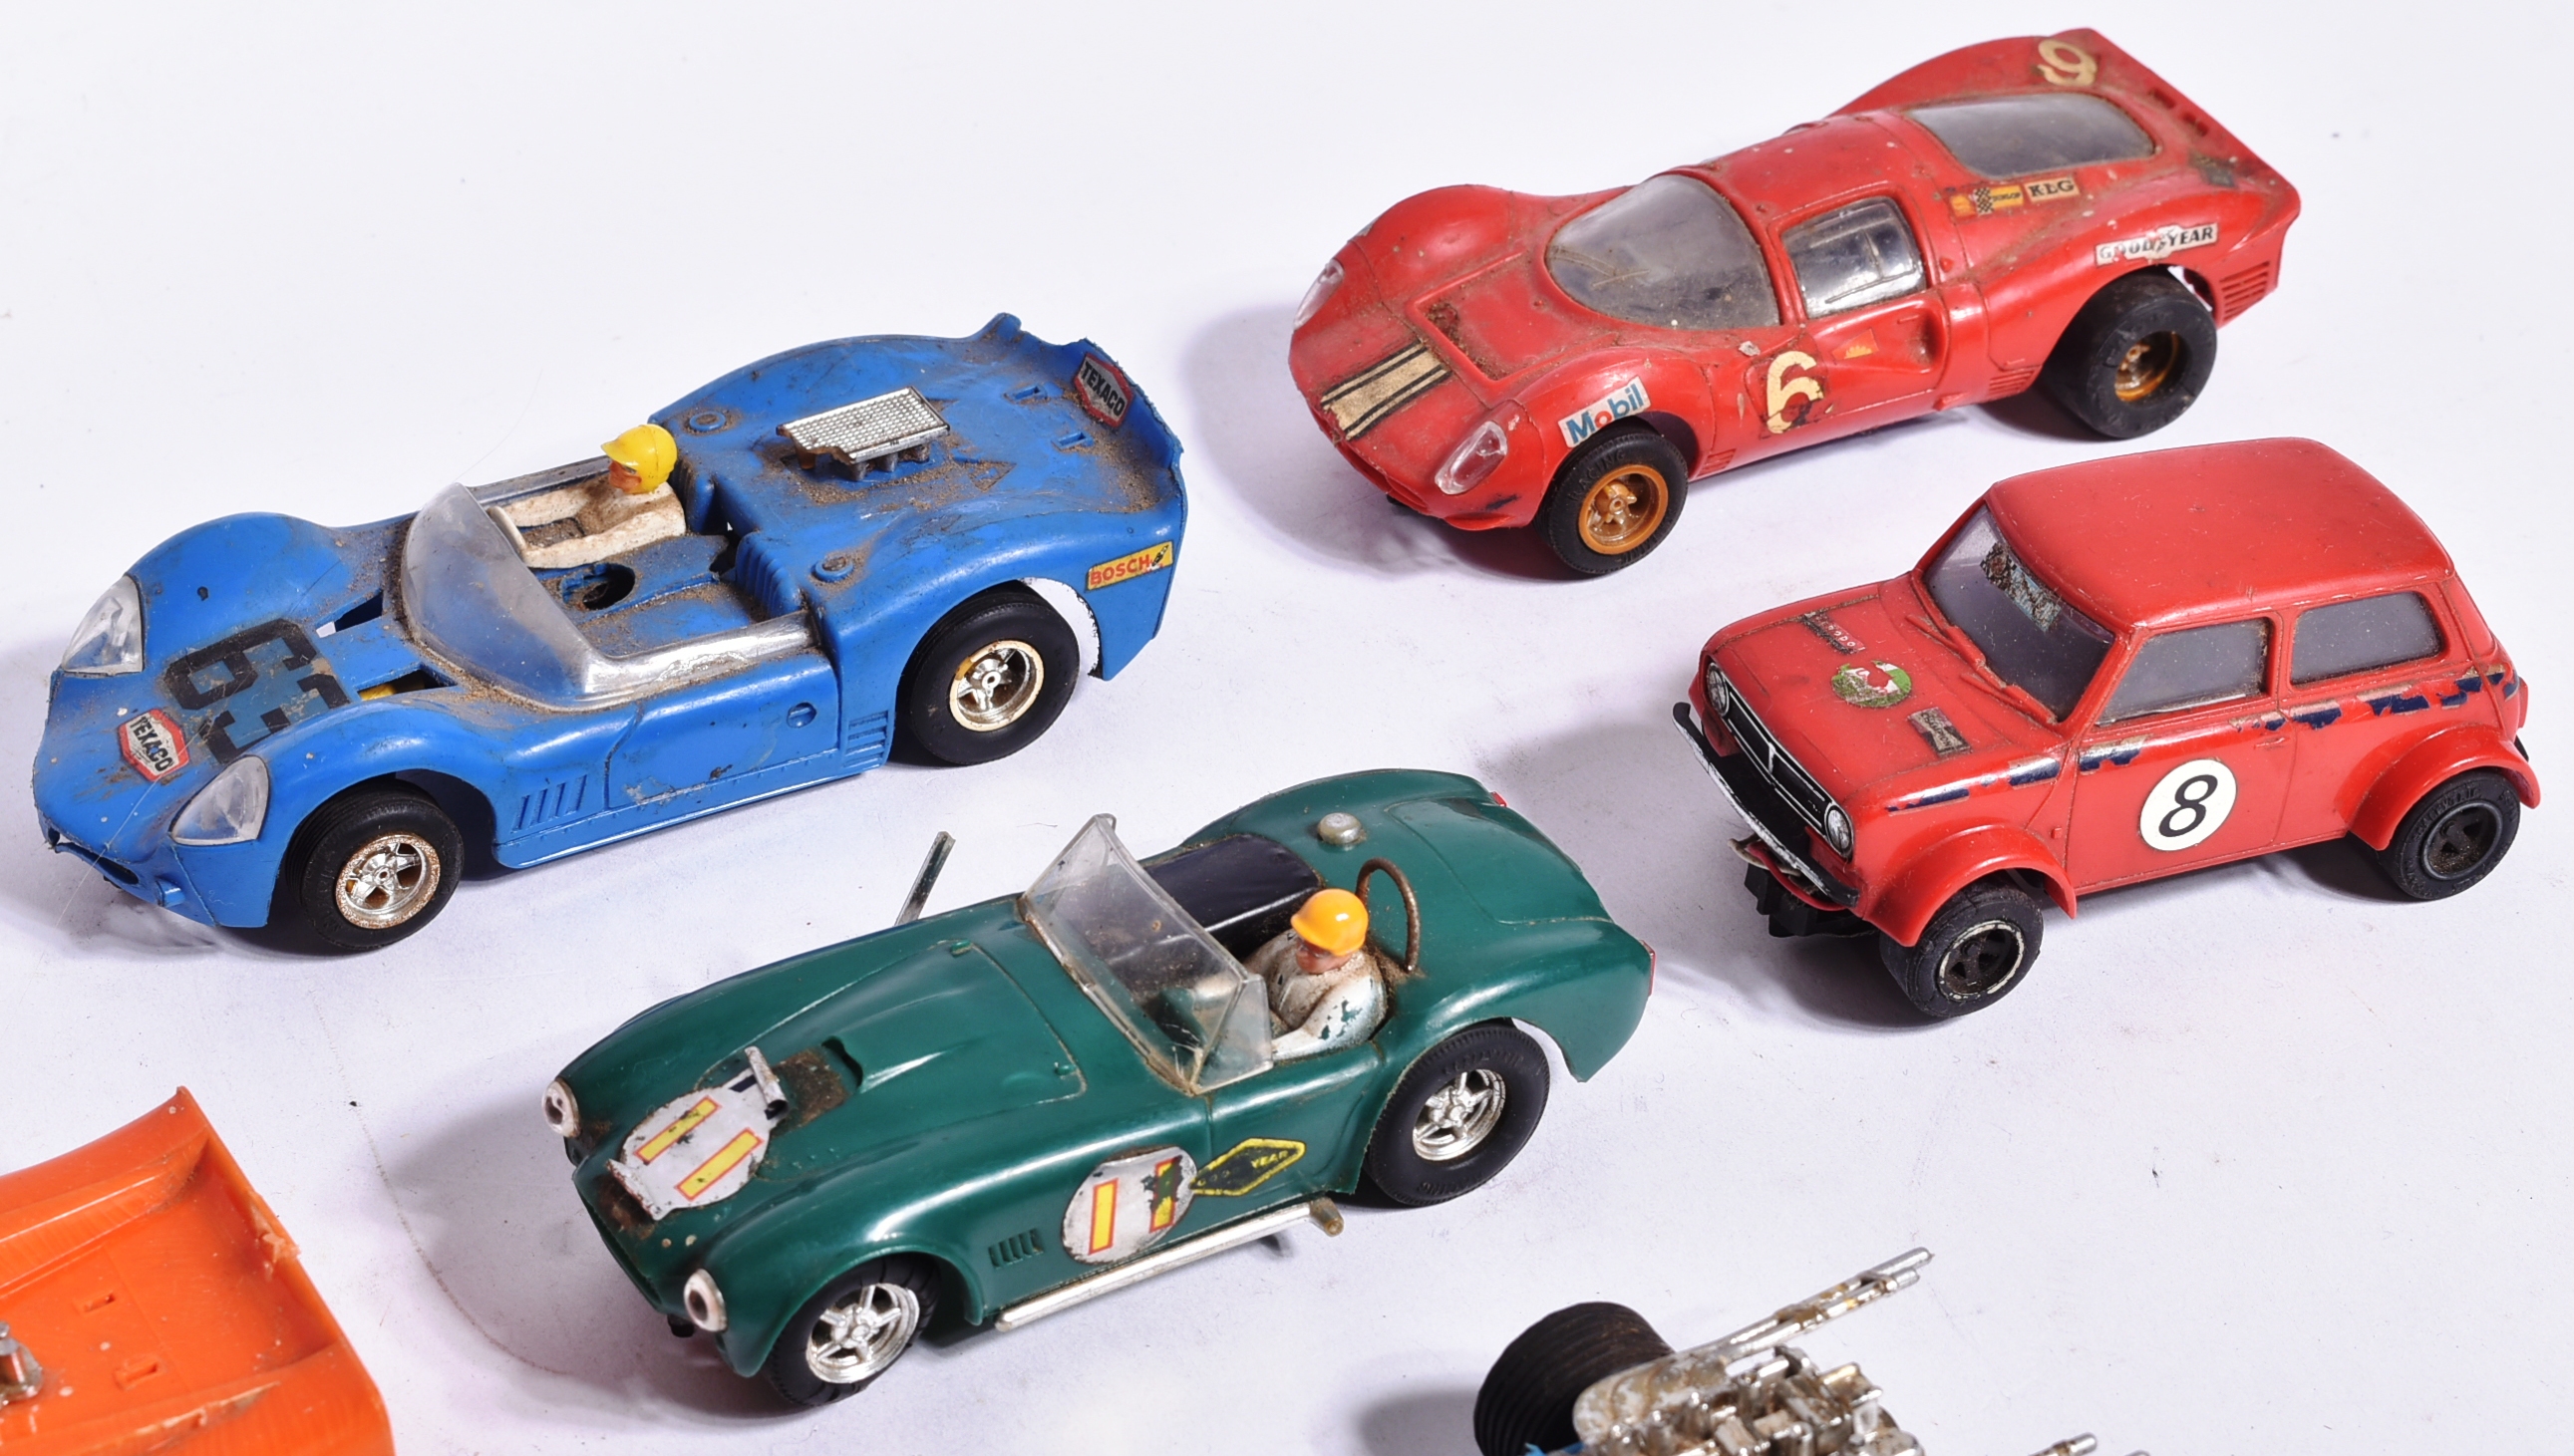 SCALEXTRIC - COLLECTION OF VINTAGE SCALEXTRIC SLOT CARS - Image 2 of 5